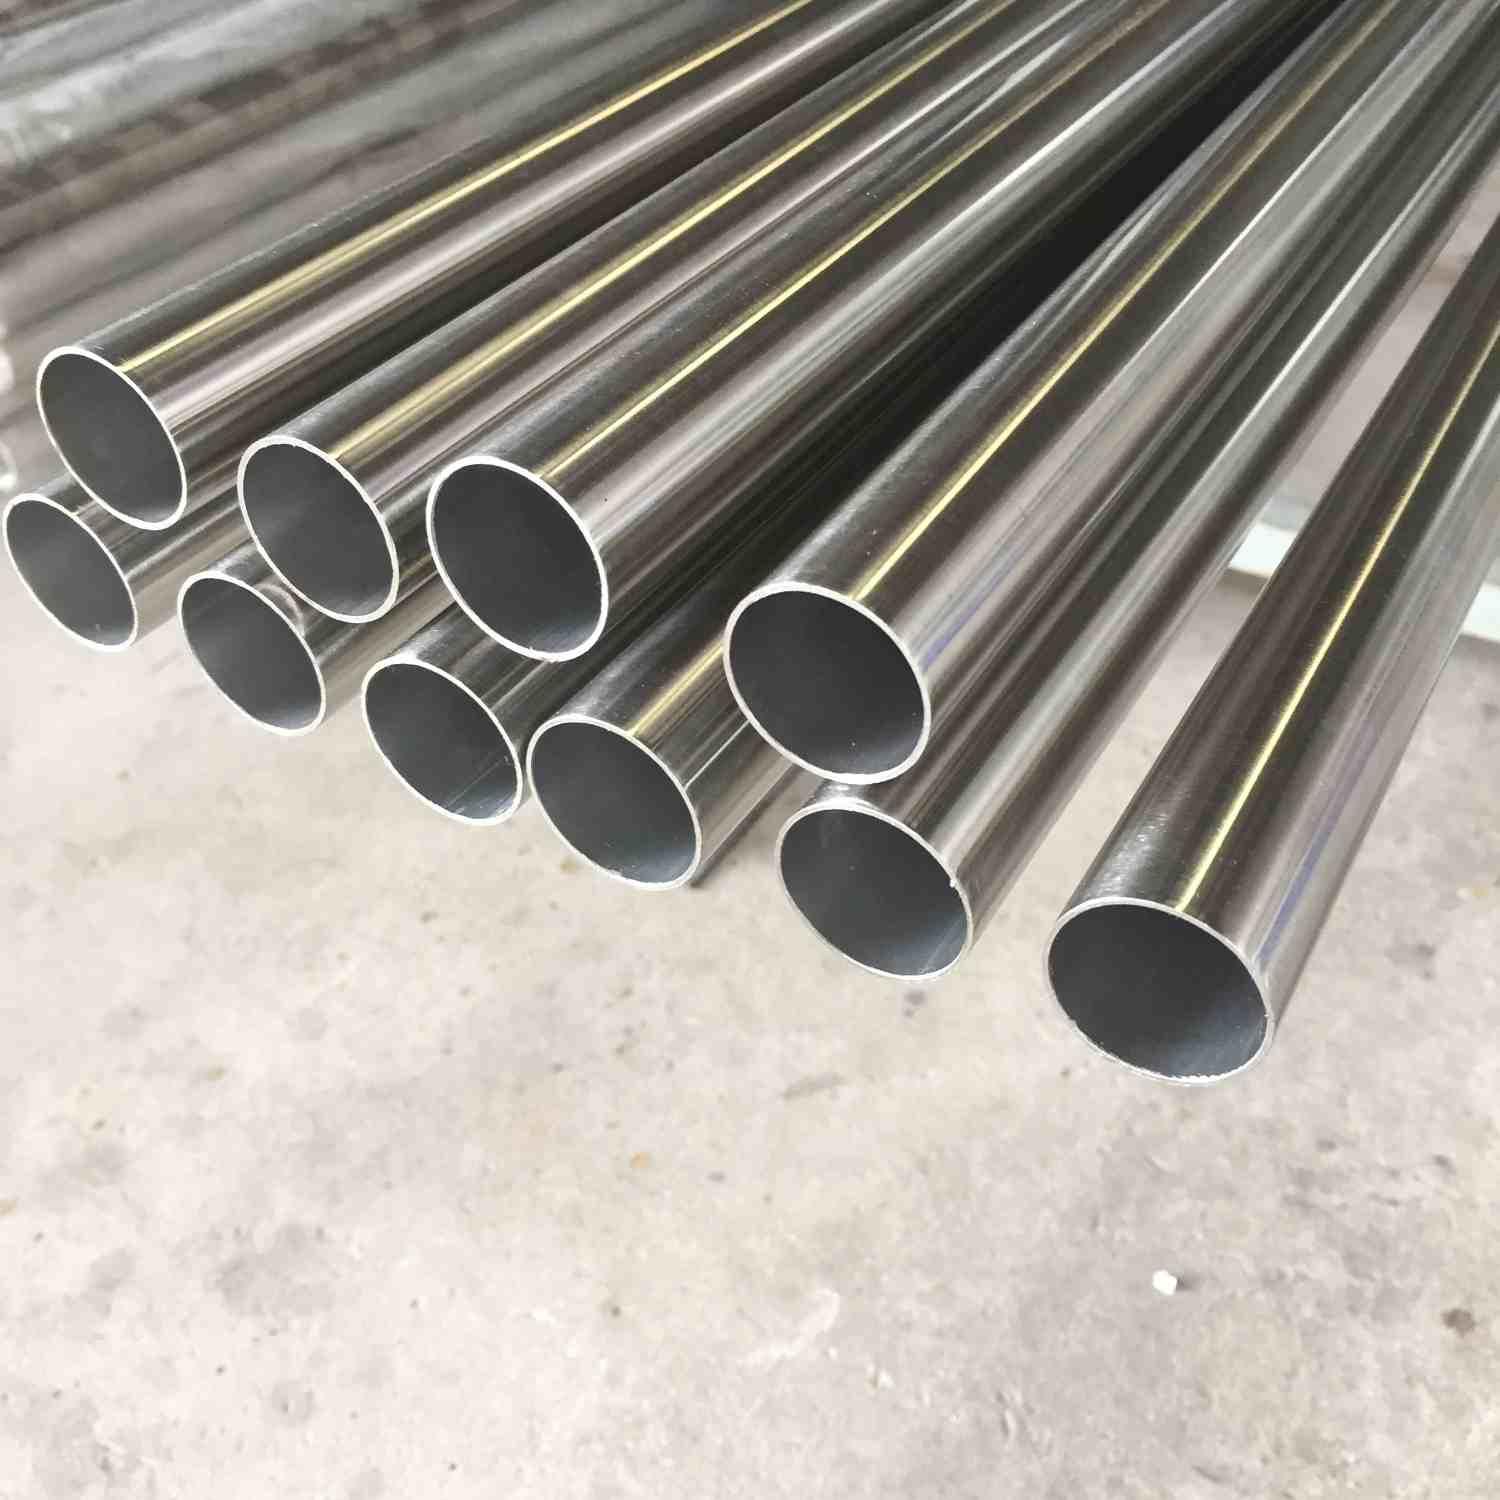 Is the stainless steel pipe rusty